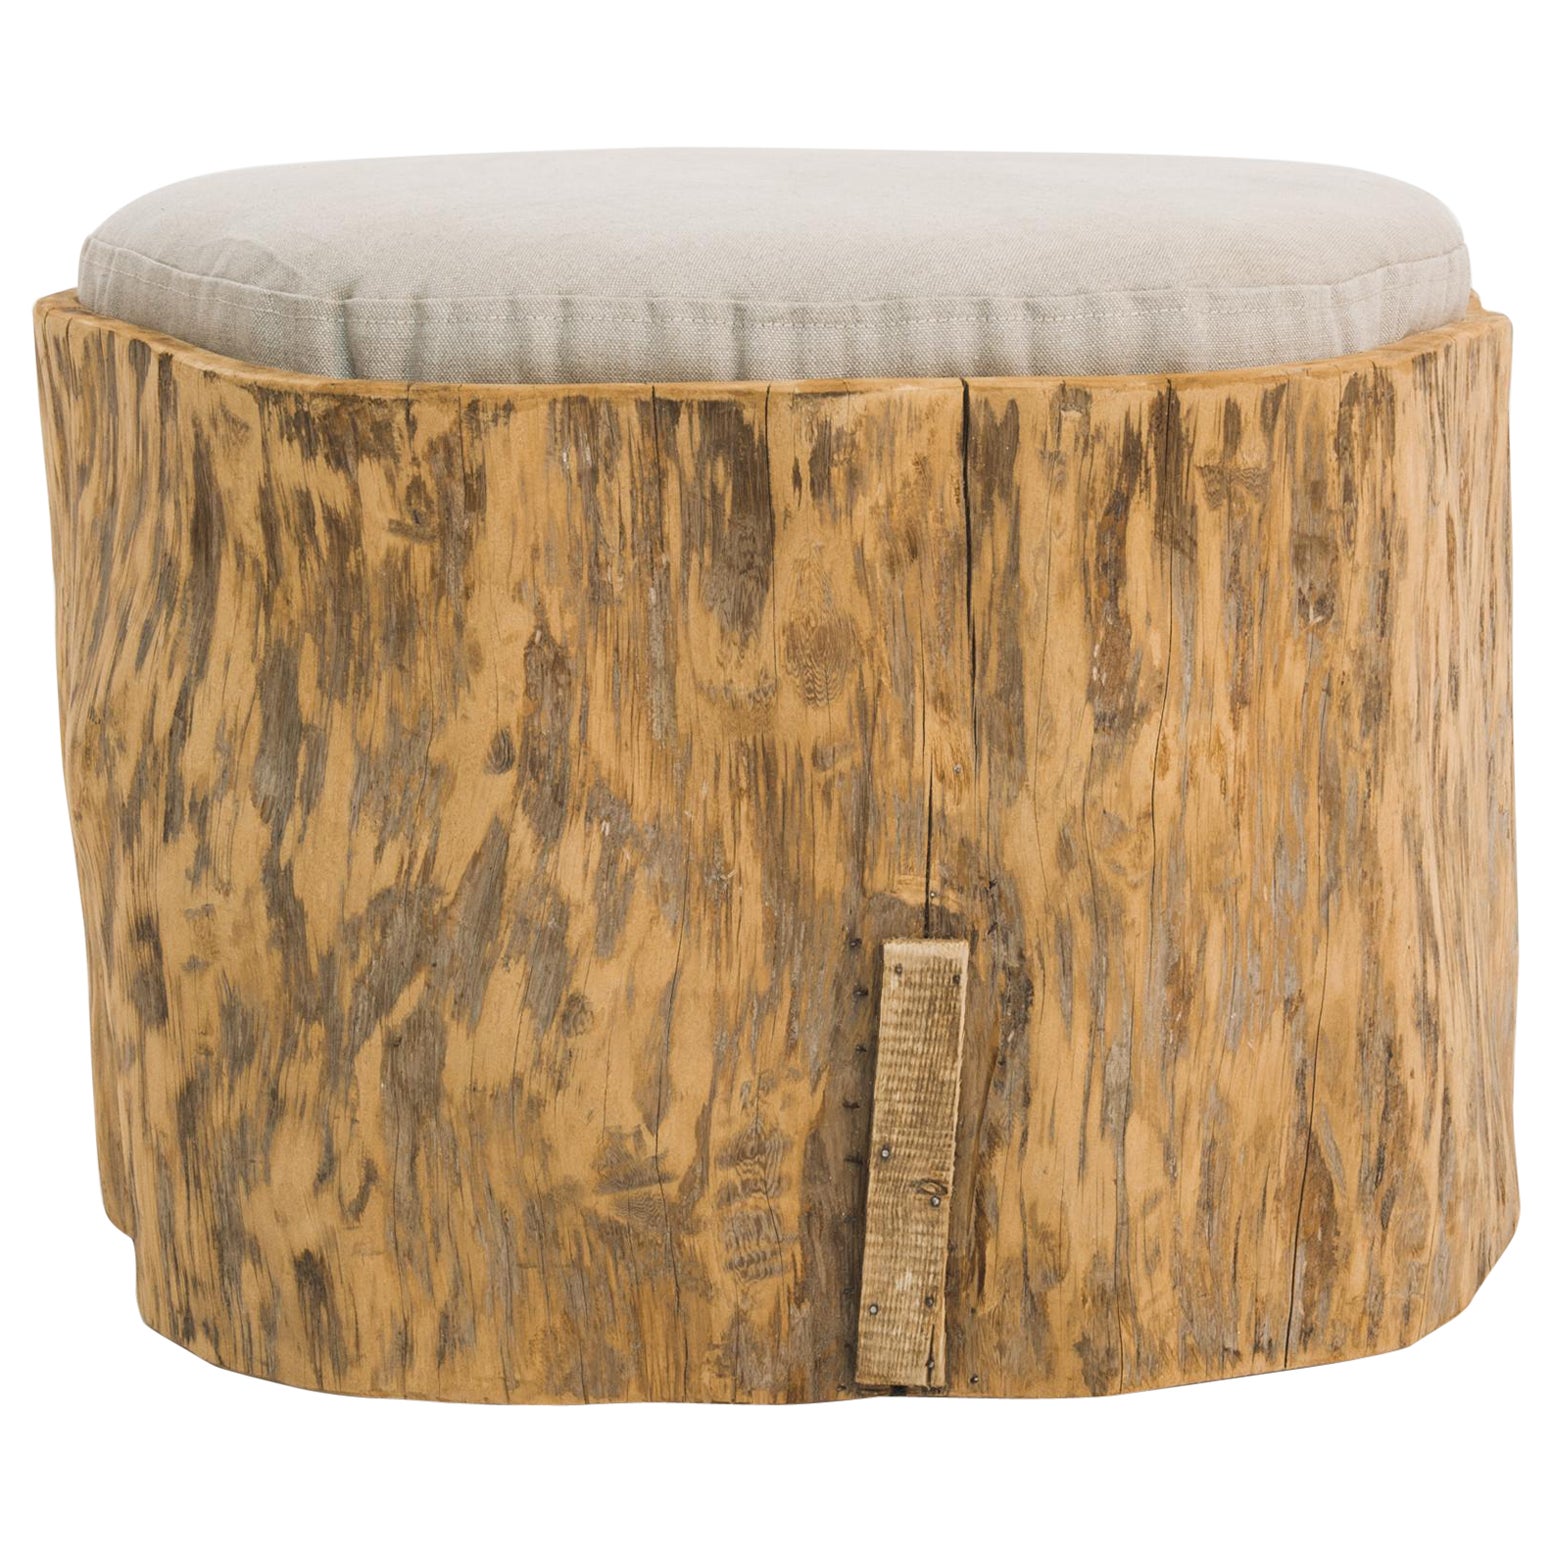 Central European Tree Trunk with Upholstered Seat